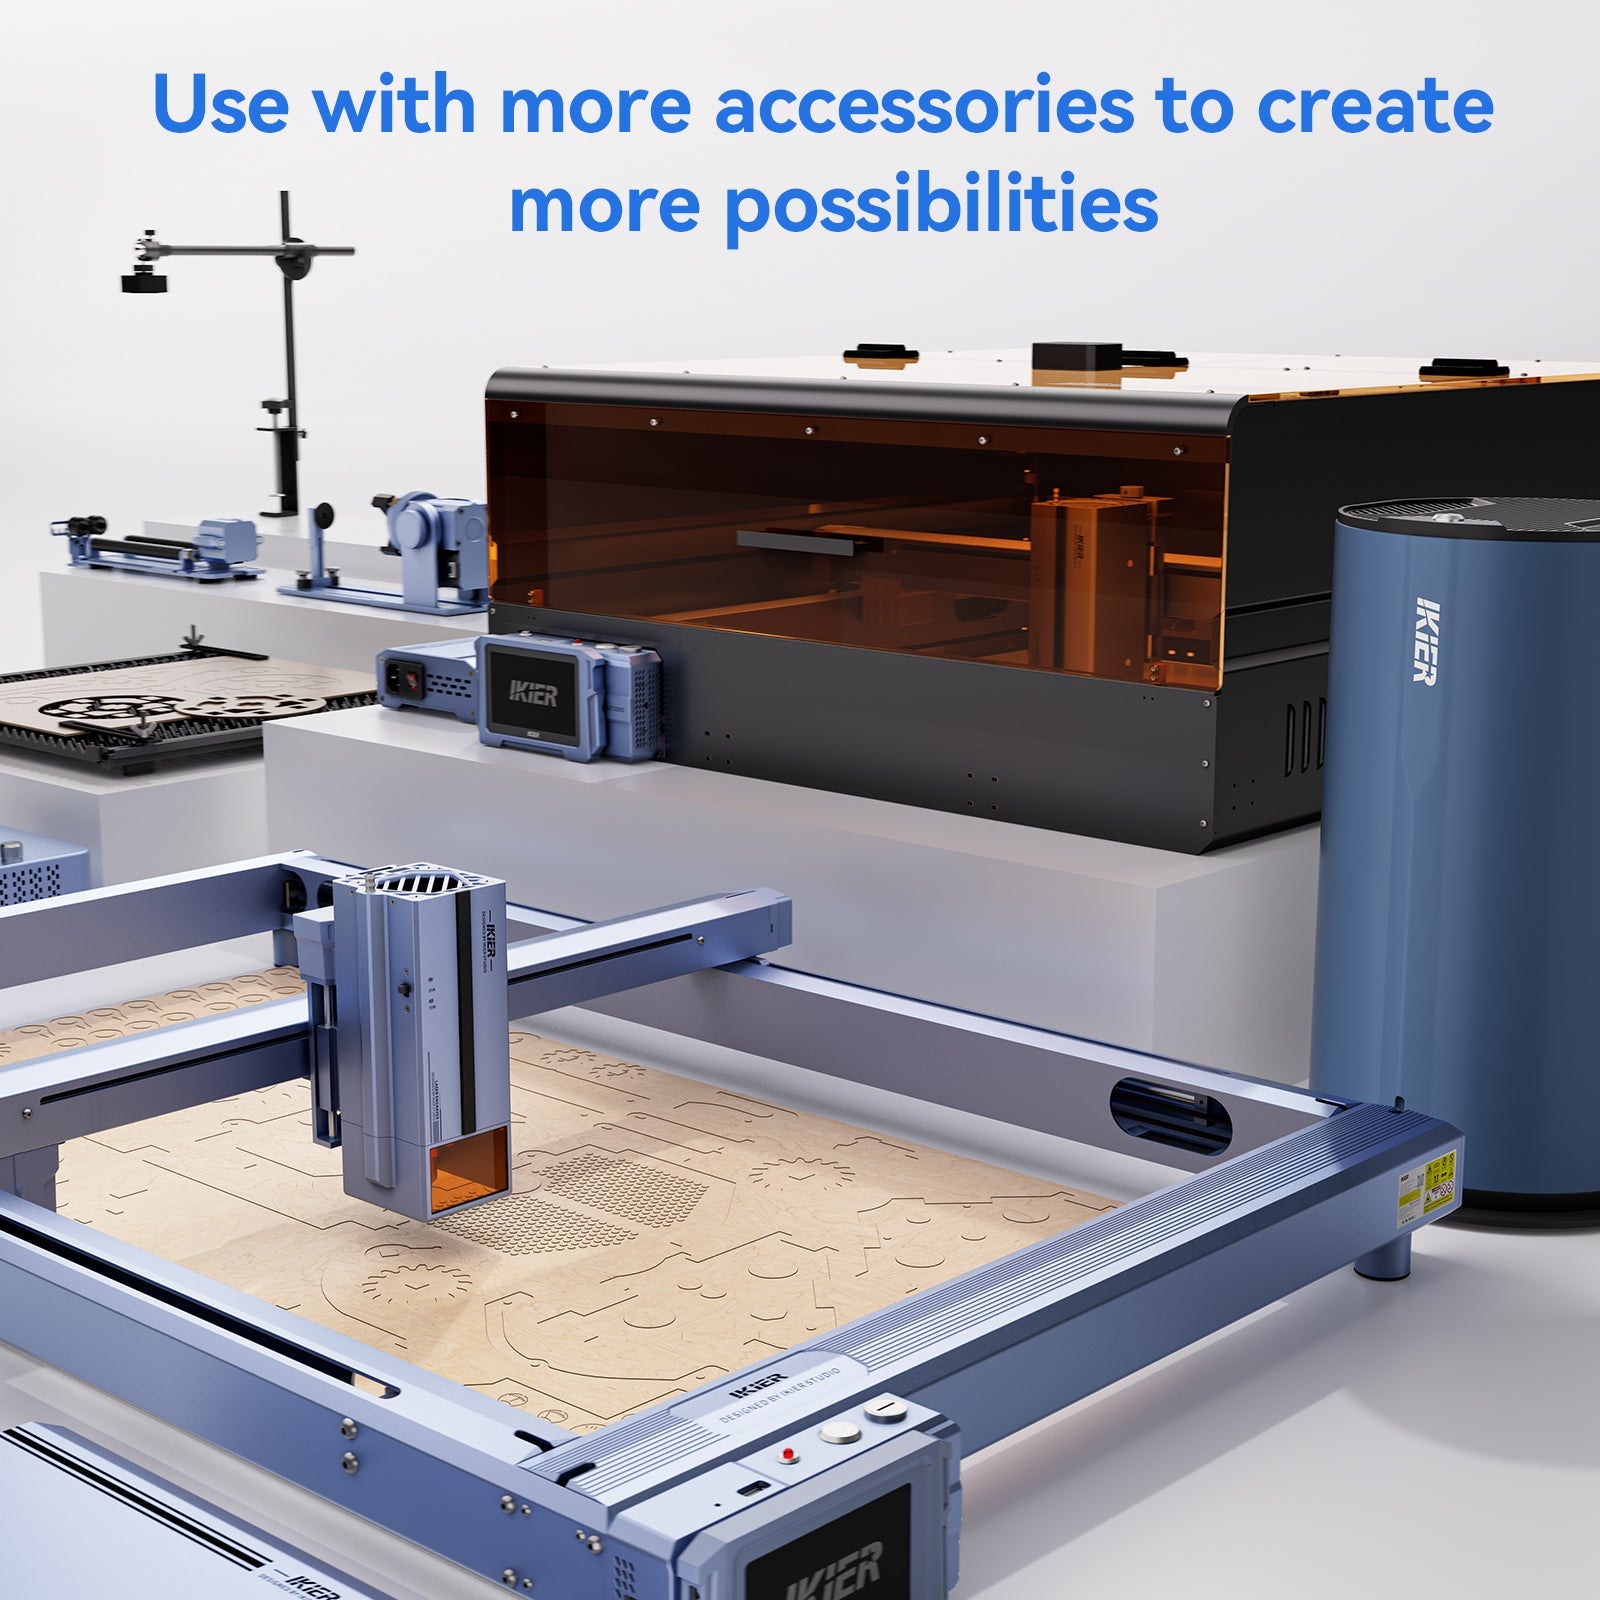 iKier laser engraver machines and accessories